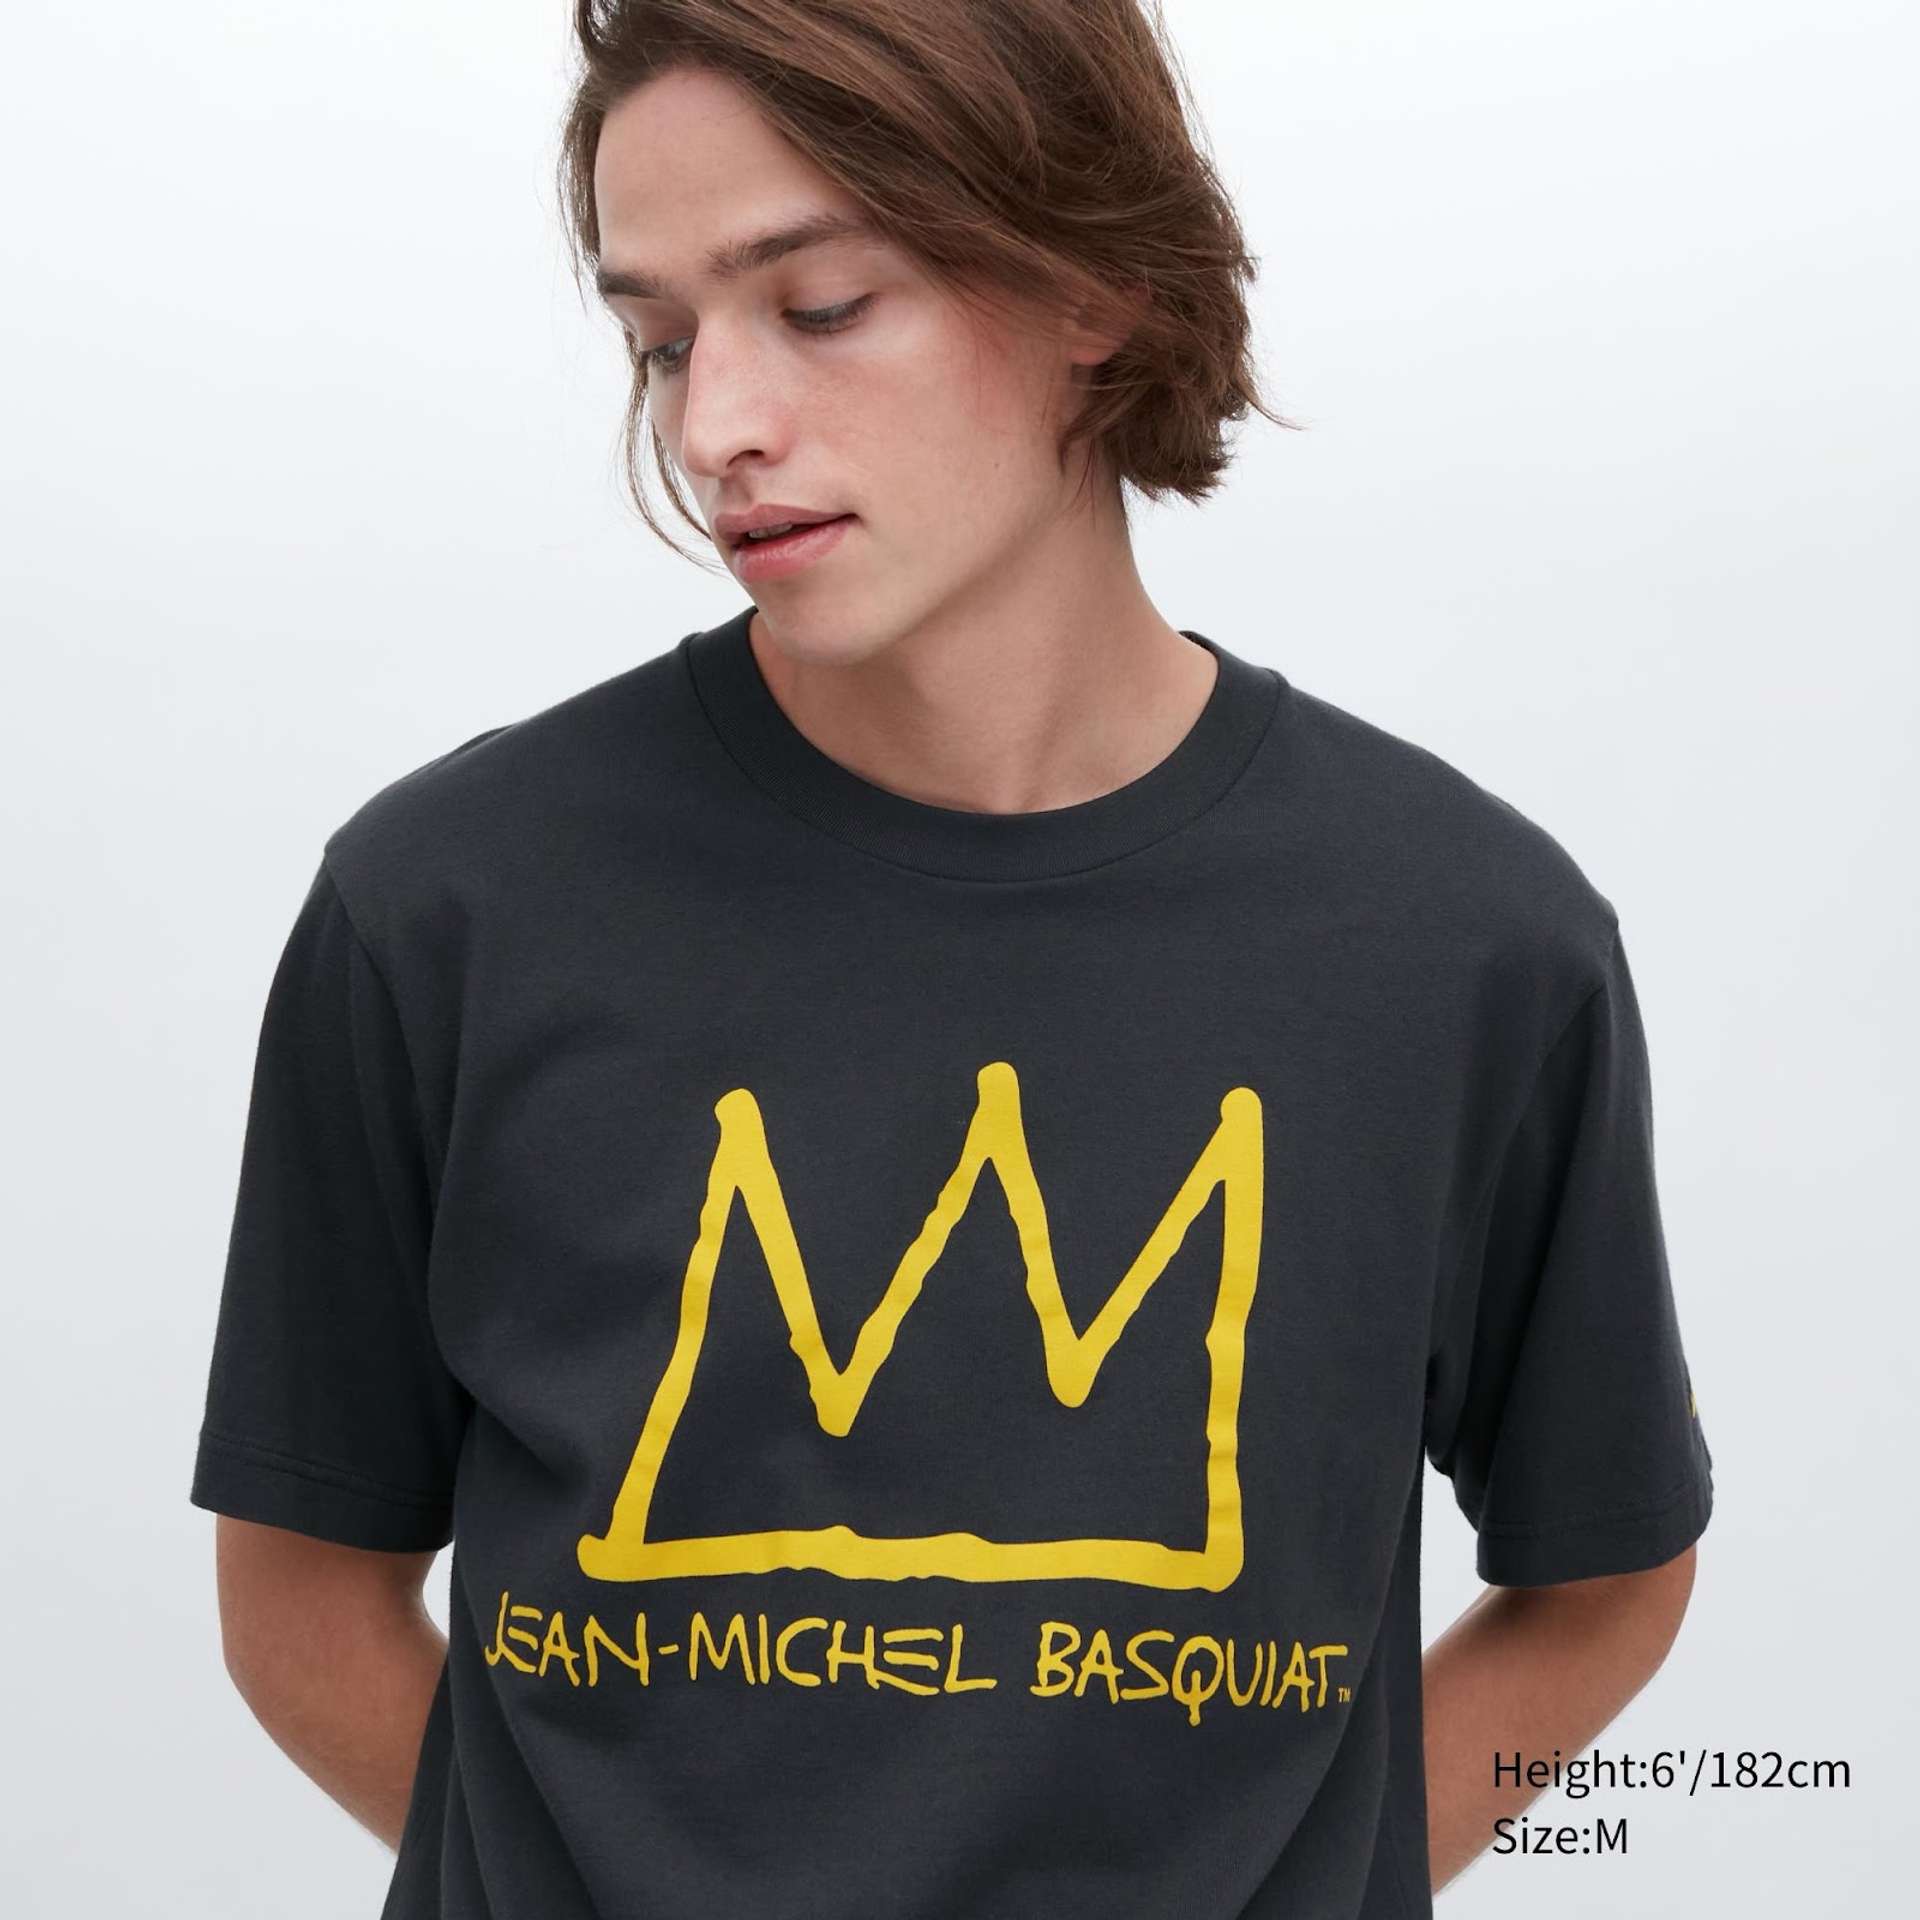 An image of a model wearing a grey Uniqlo t-shirt featuring a yellow depiction of Basquiat’s crown motif with the artist’s name underneath.